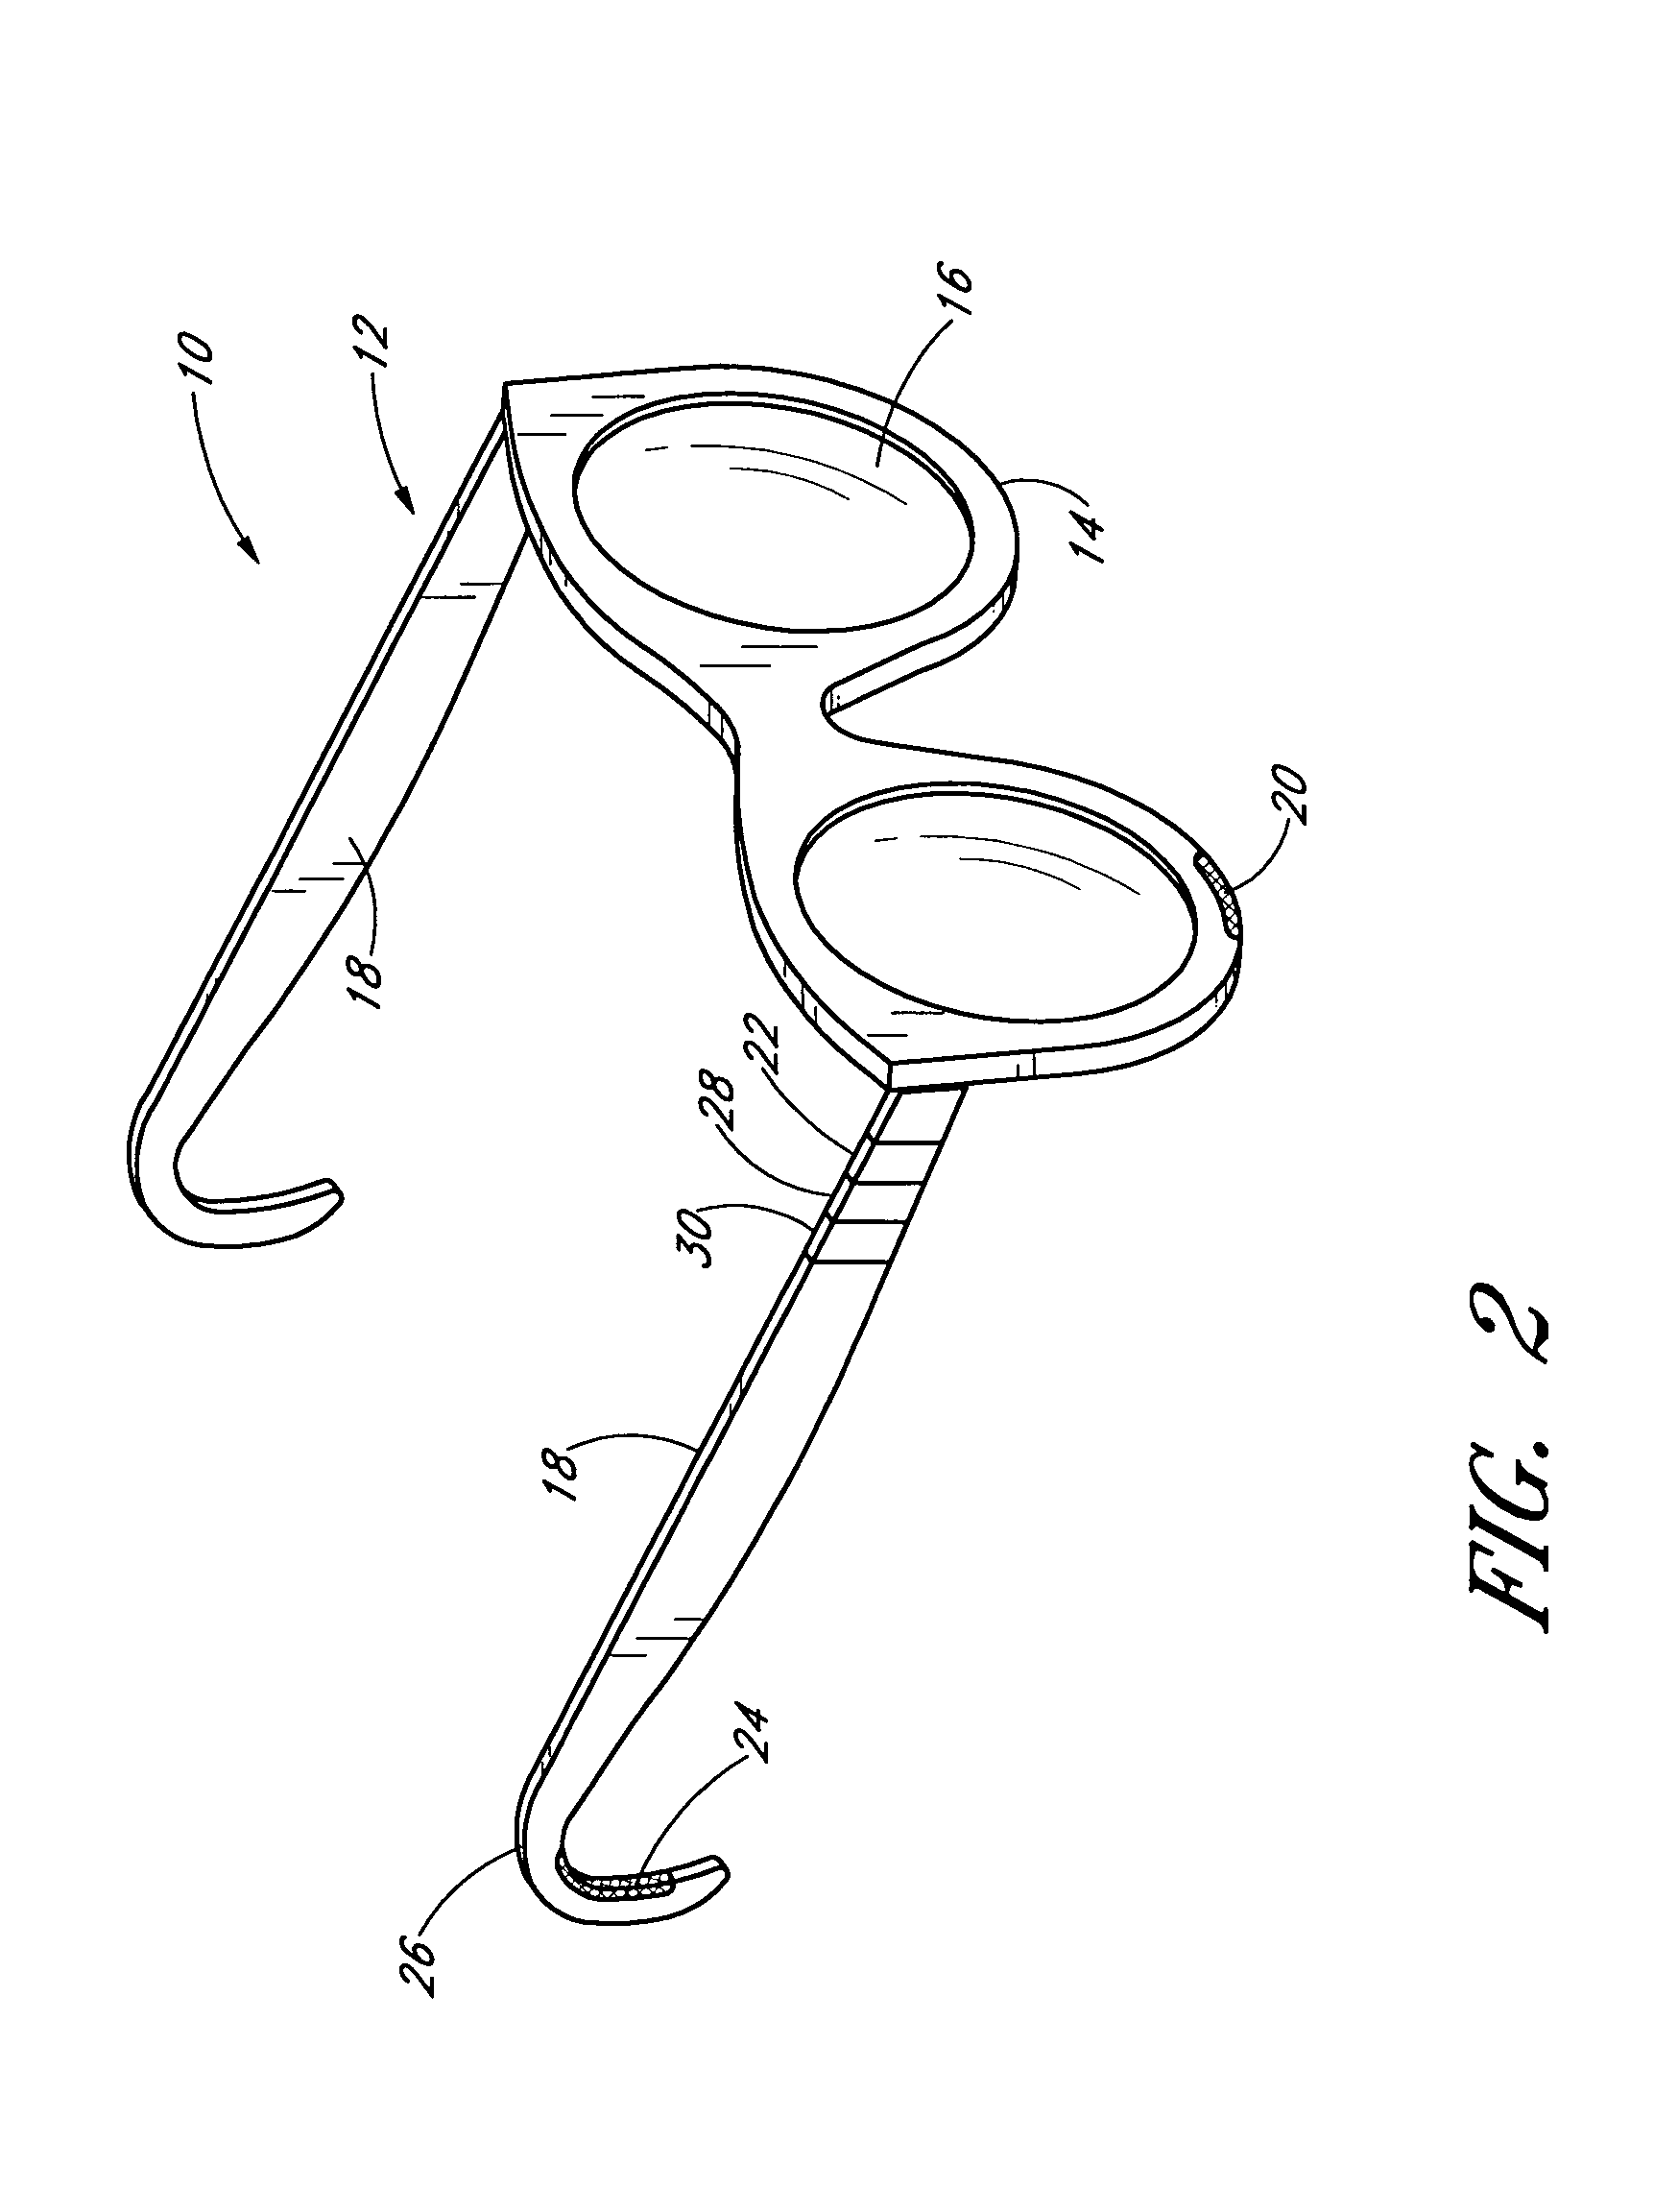 Eyeglasses with wireless communication features